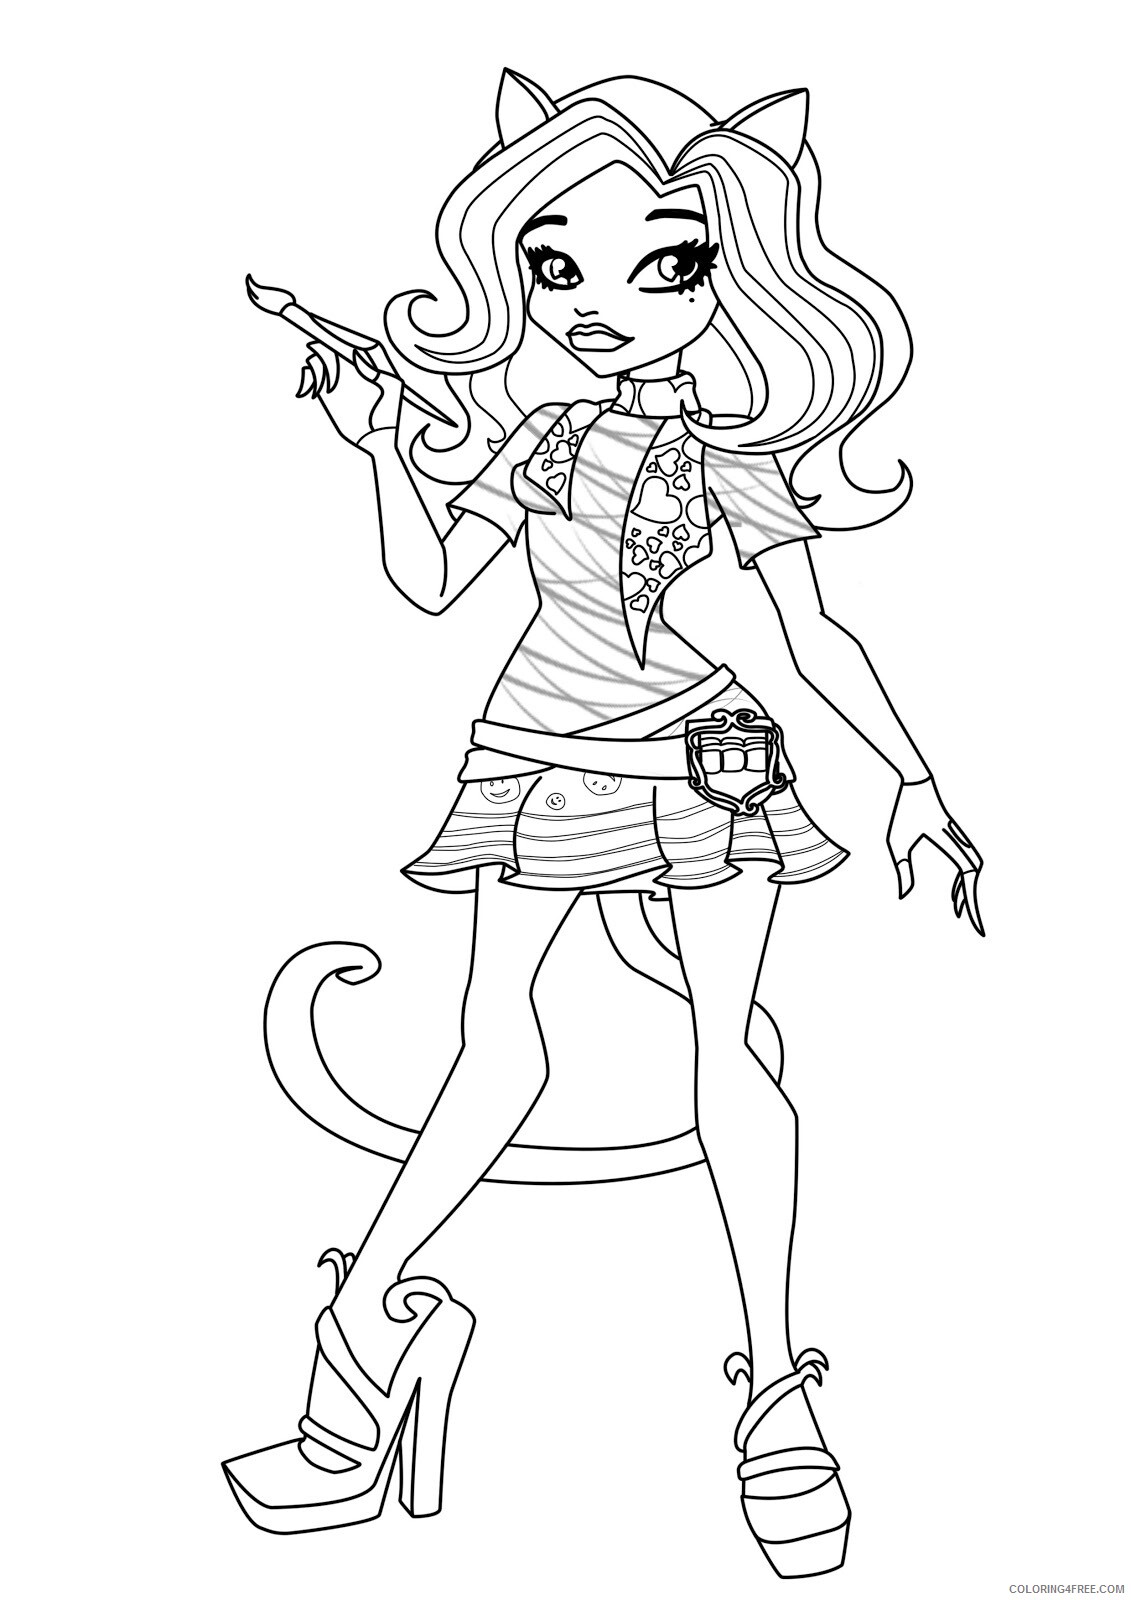 Monster High Coloring Pages Monster High For Kids Images Printable 2021 4227 Coloring4free